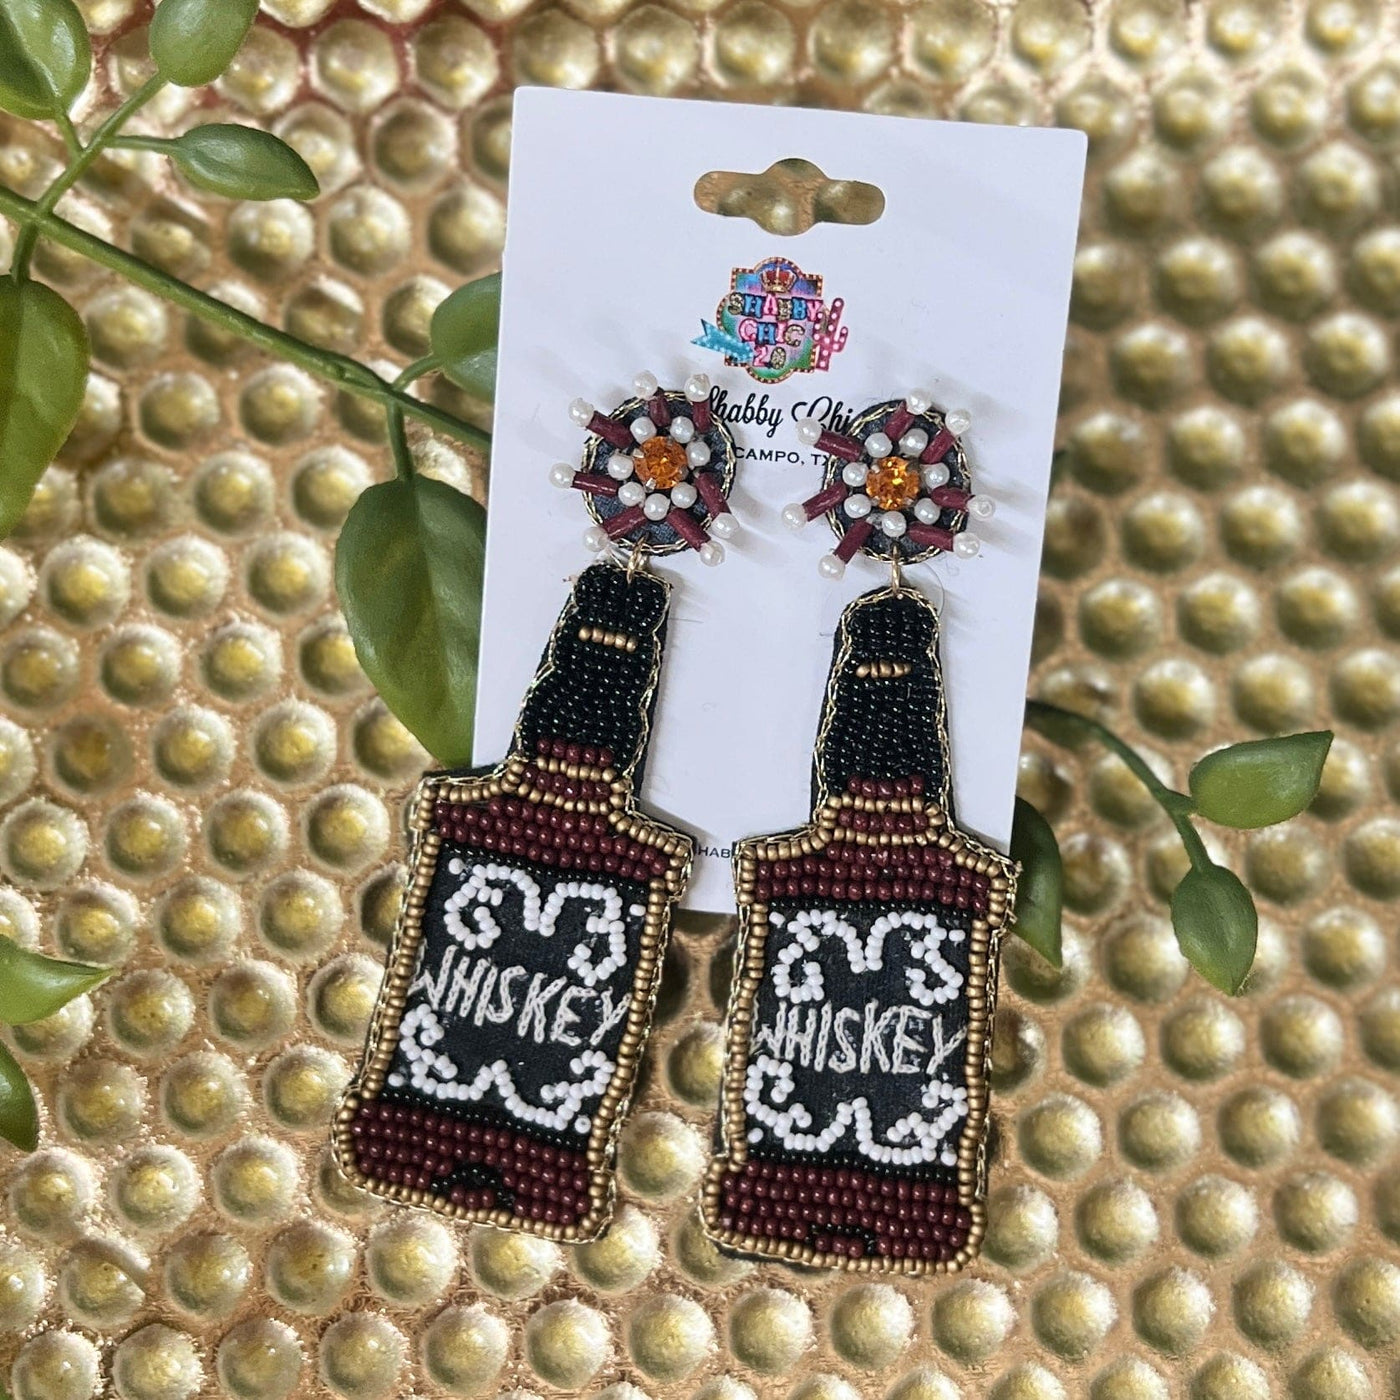 Beaded Whiskey Earrings Shabby Chic Boutique and Tanning Salon